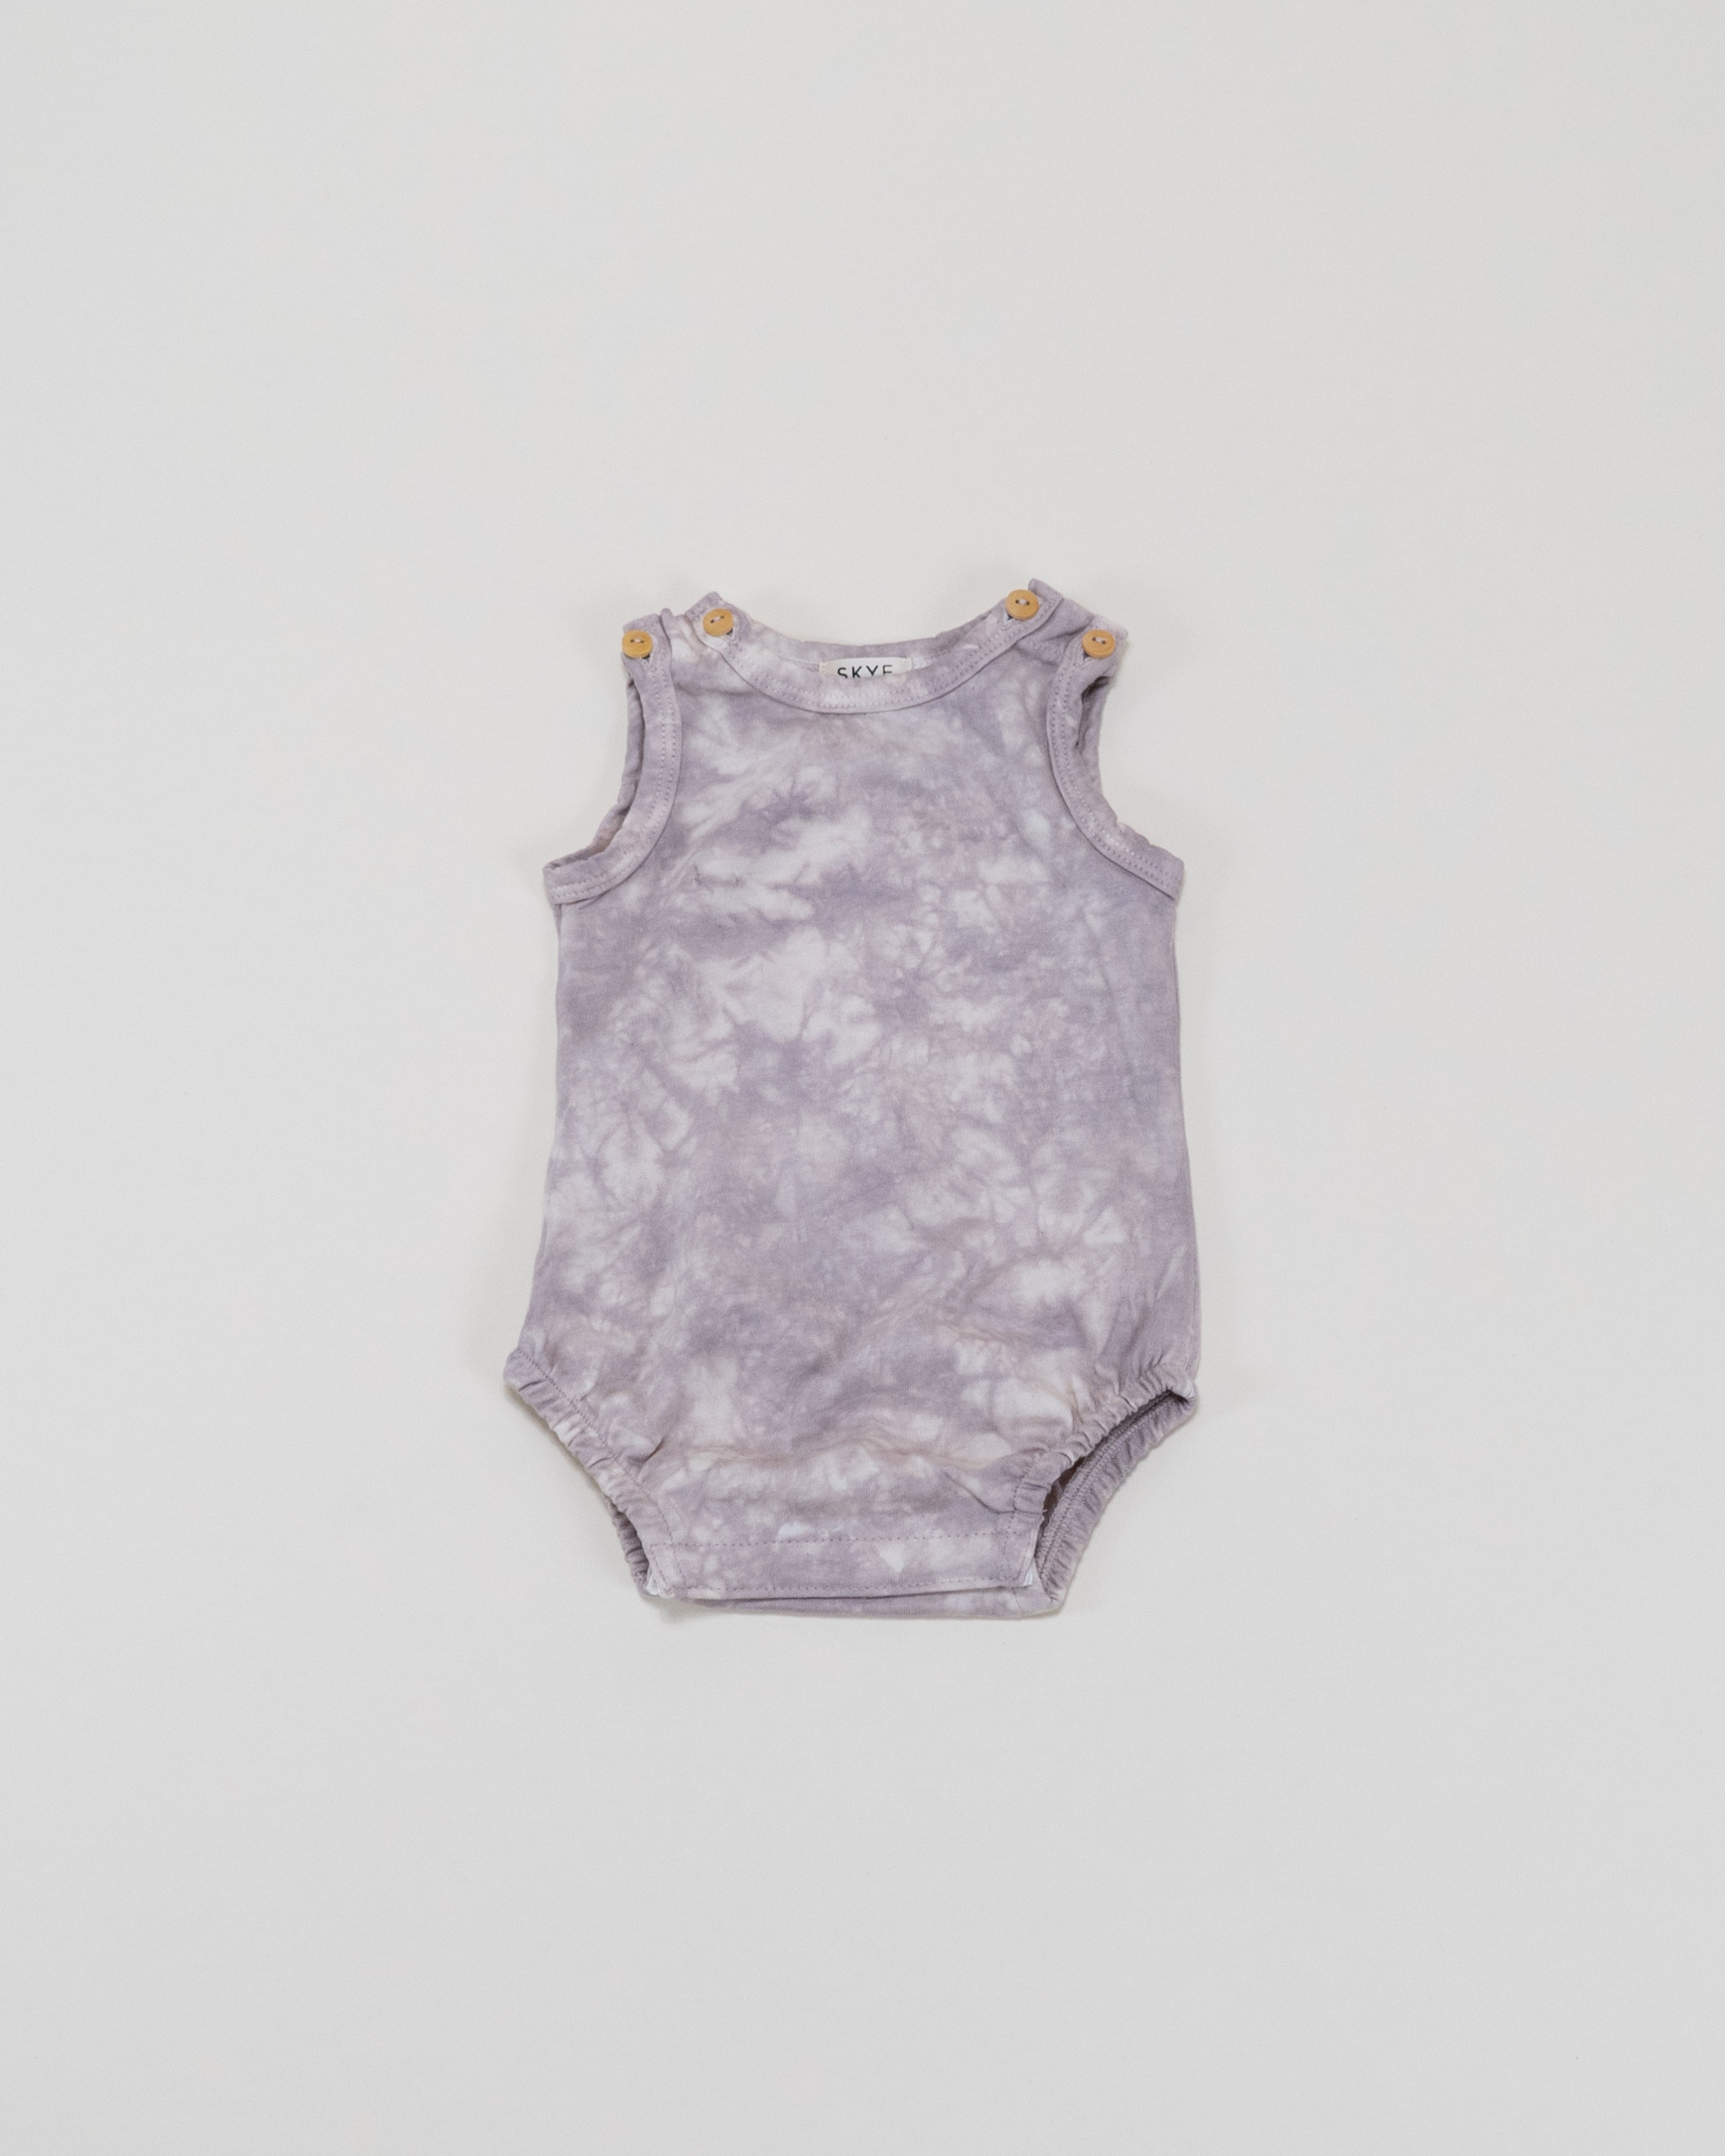 bubble onesie || lilac marble